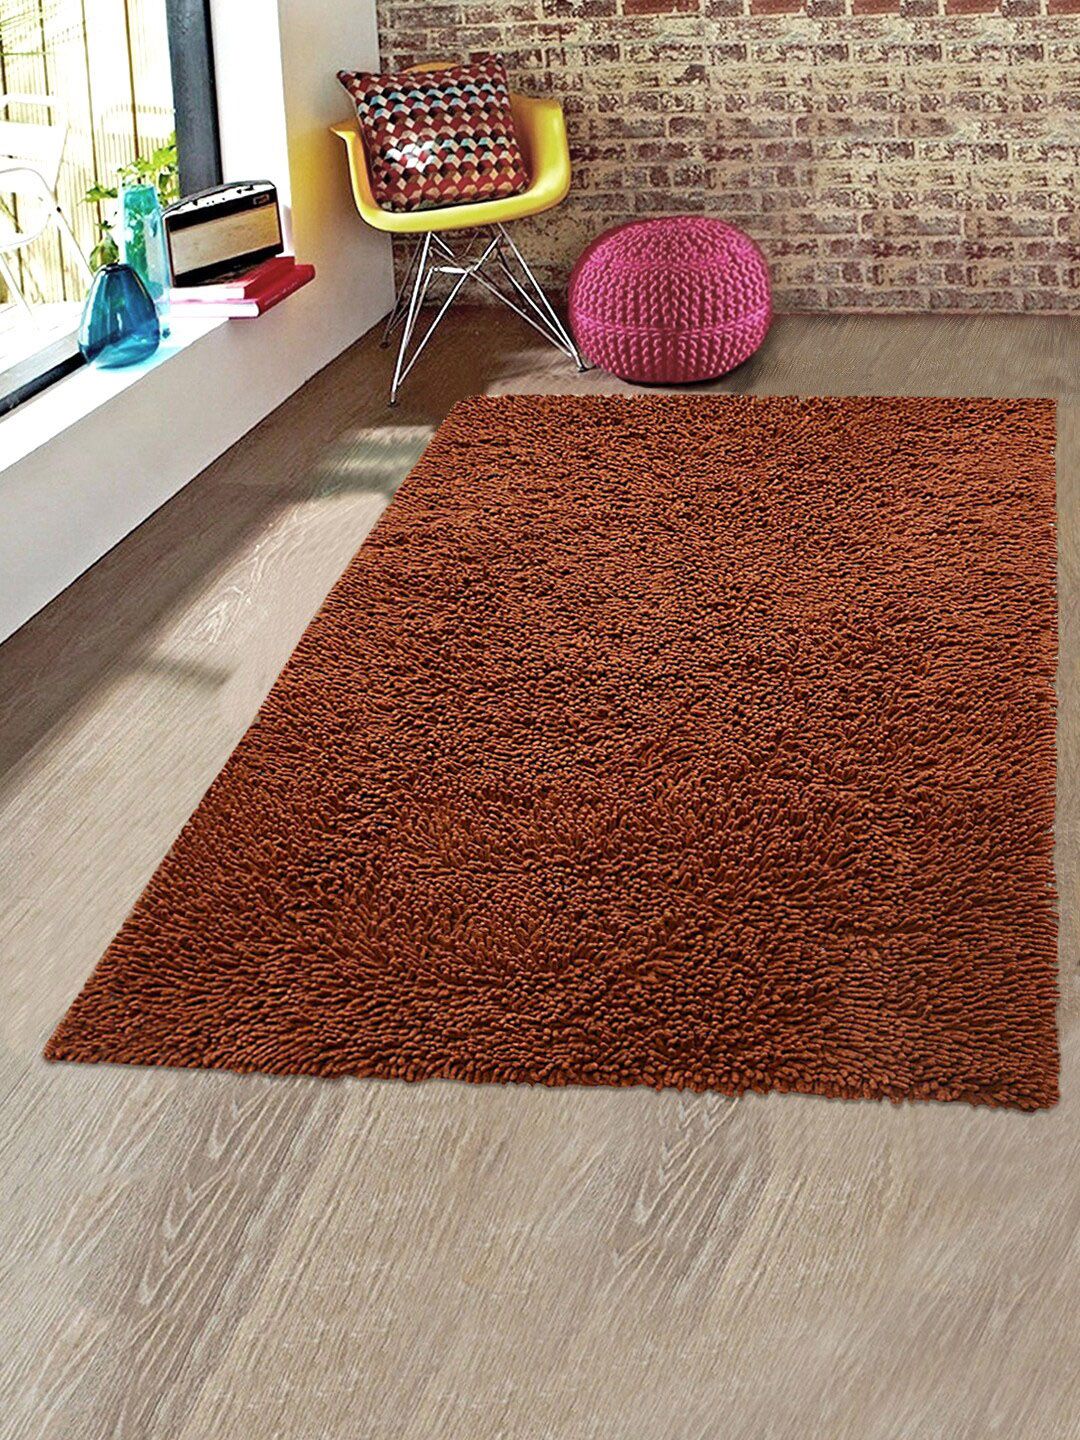 Saral Home Brown Solid Shaggy Anti-Skid Carpet Price in India